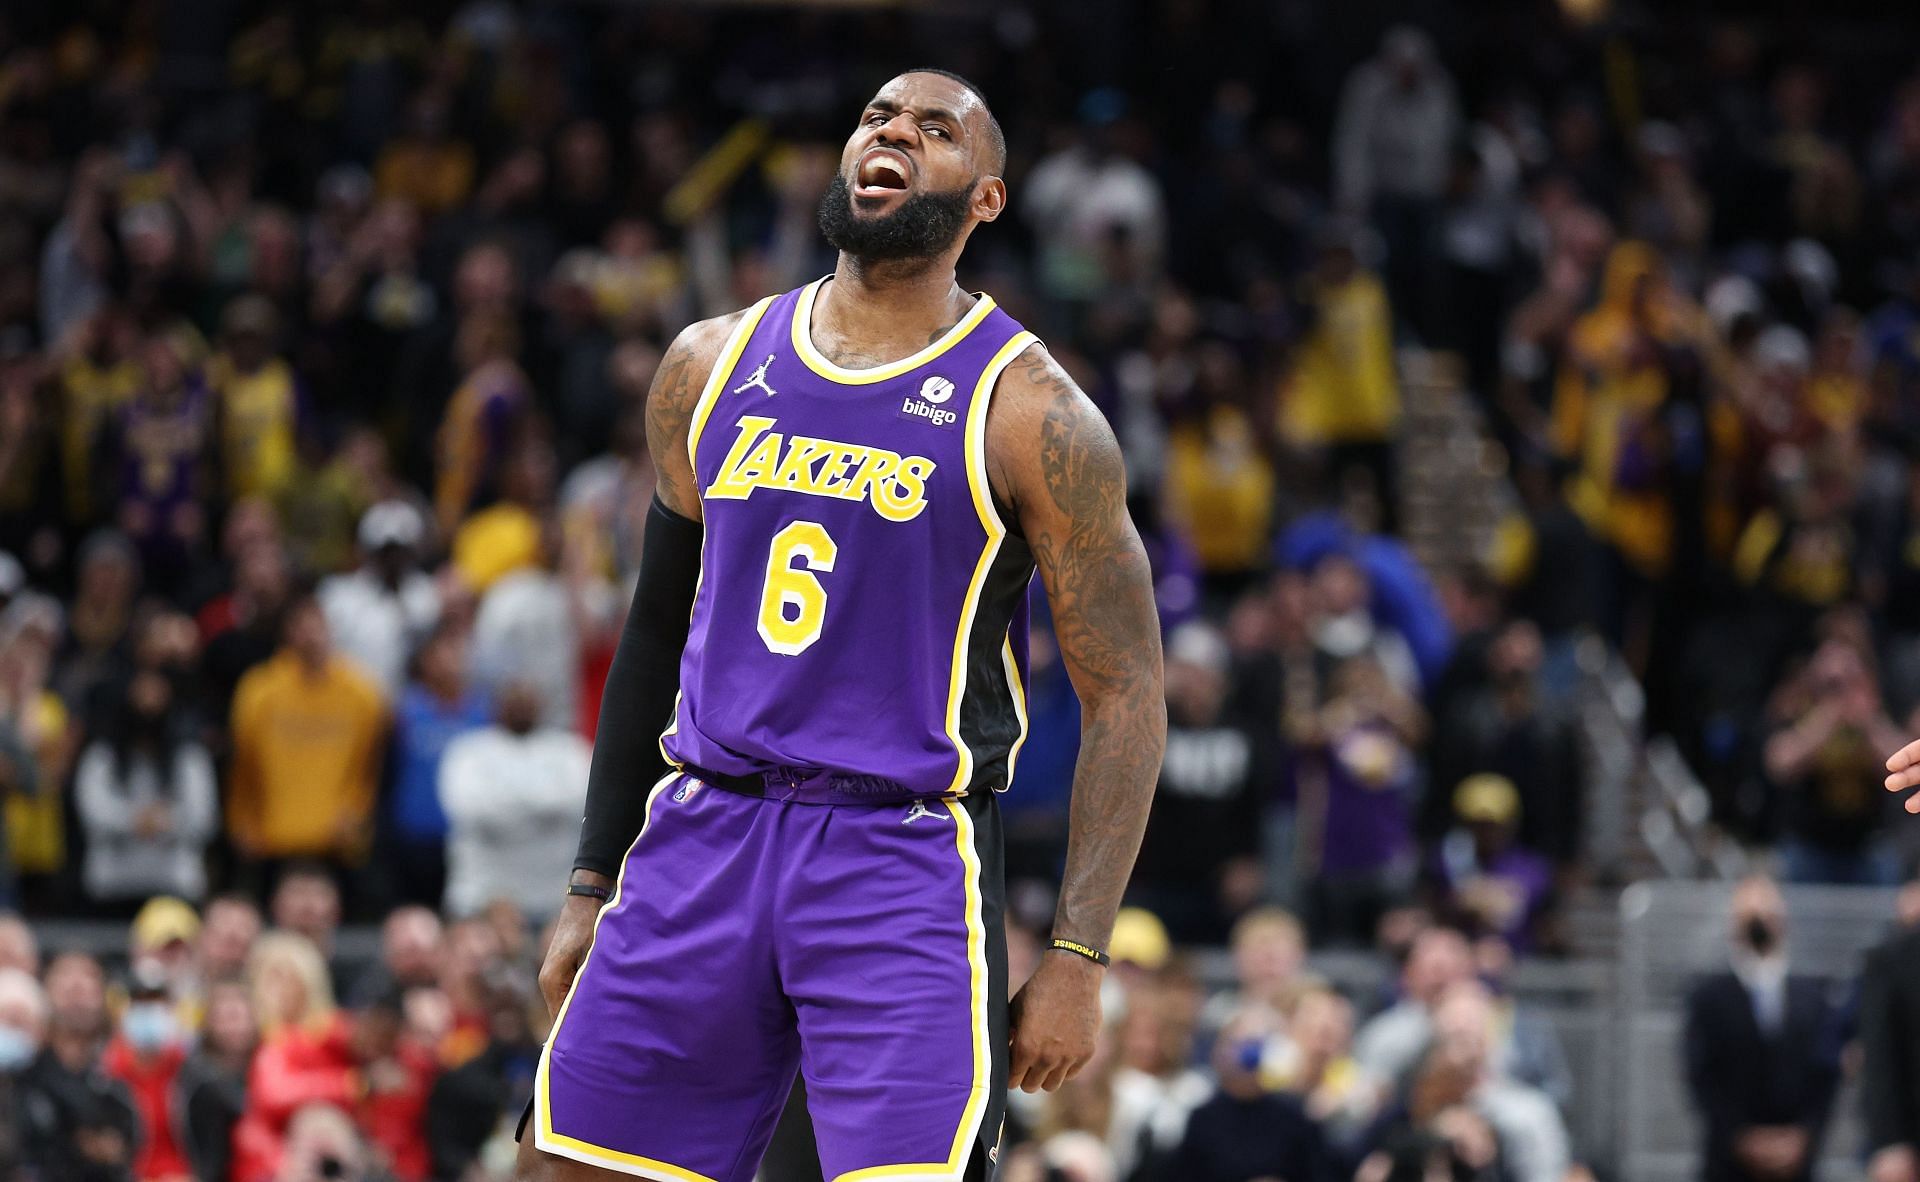 LeBron James in action during Los Angeles Lakers v Indiana Pacers